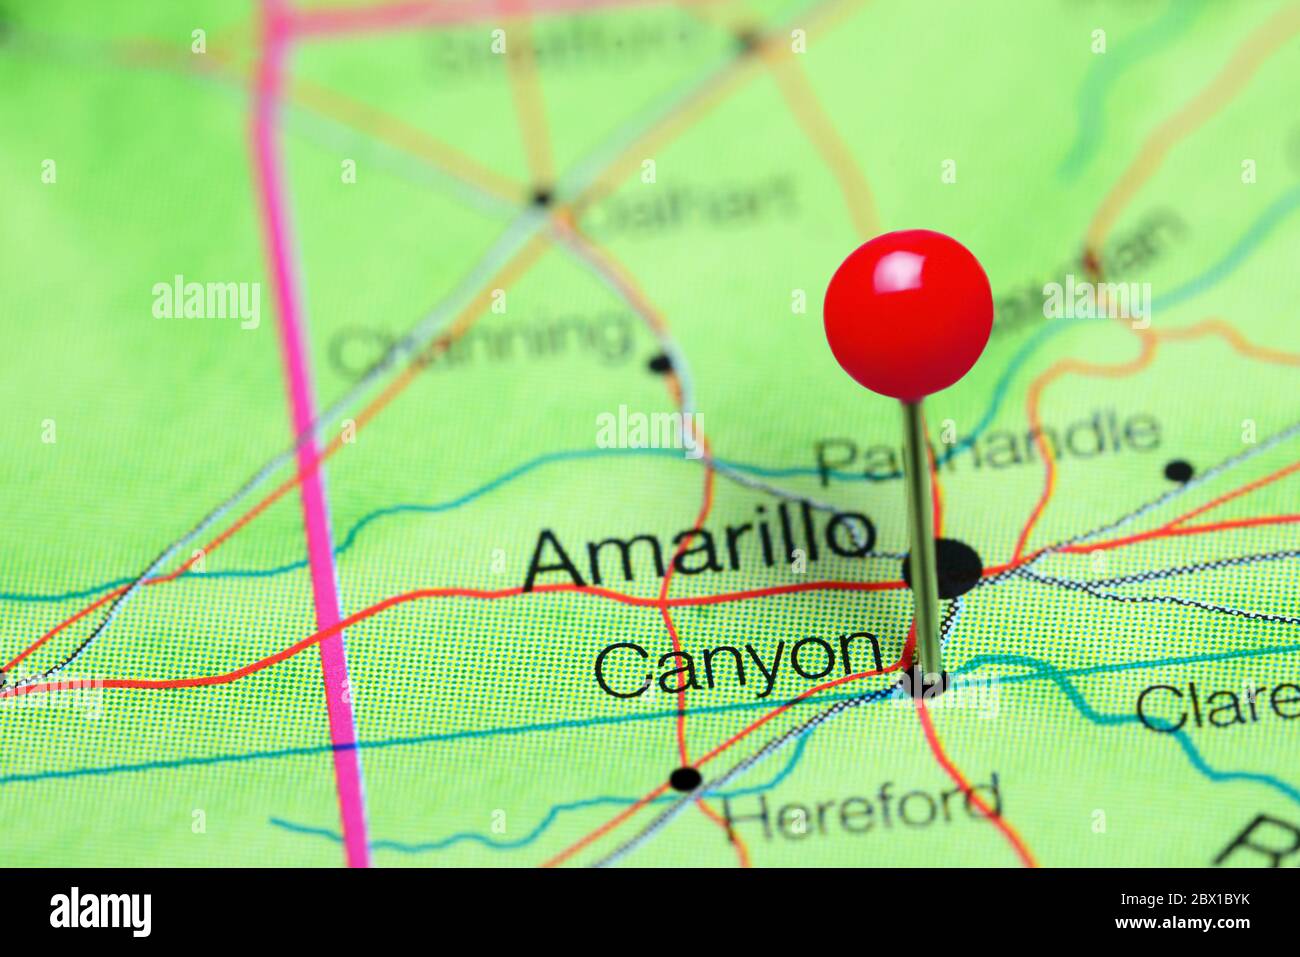 Canyon pinned on a map of Texas, USA Stock Photo